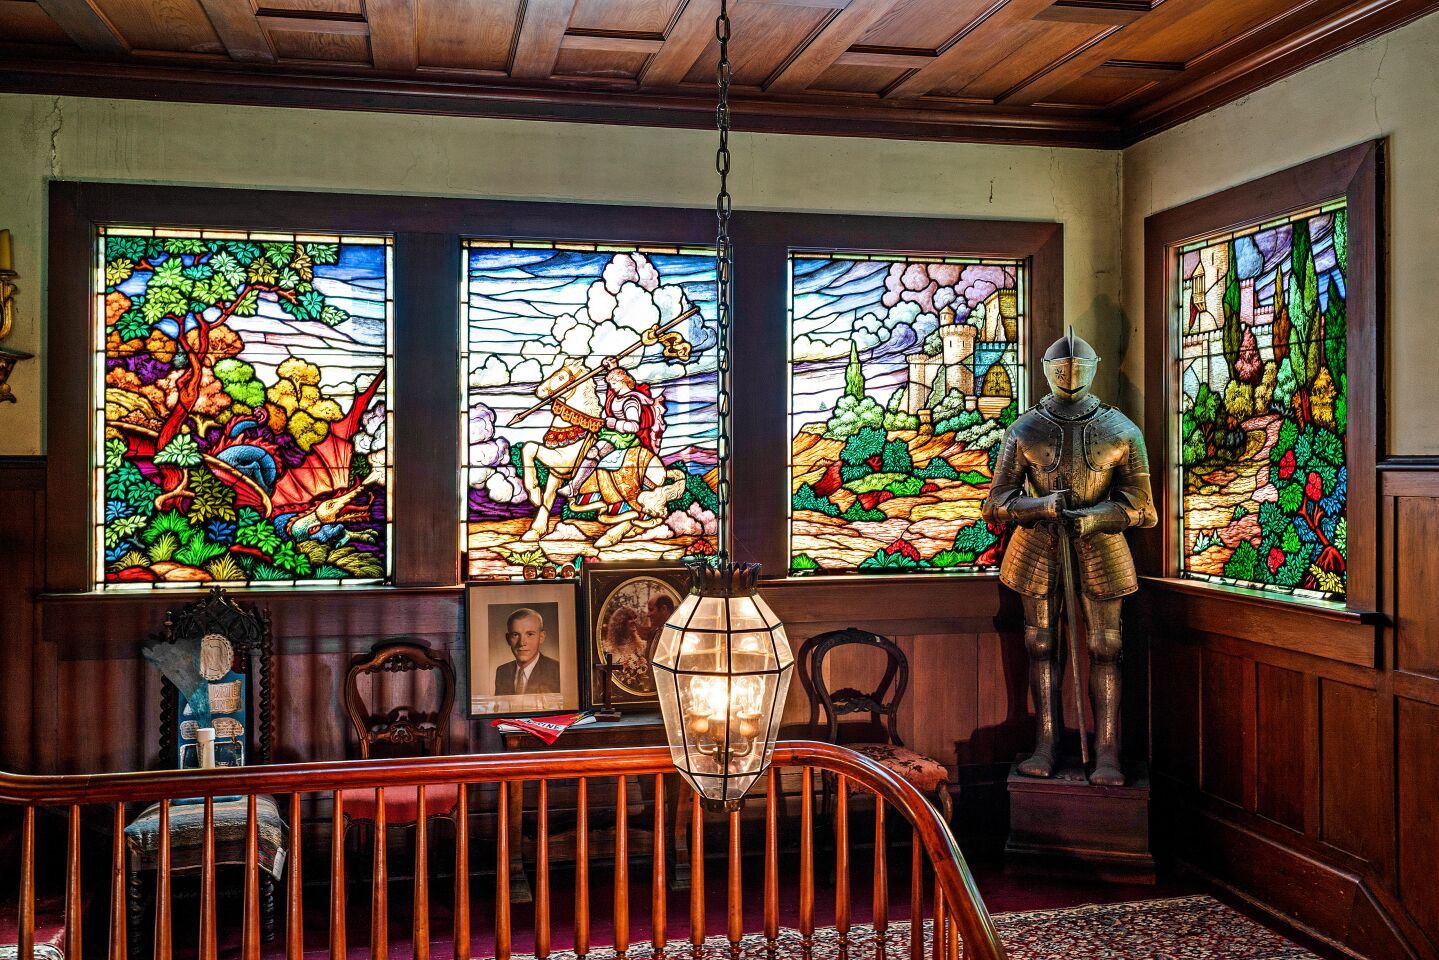 The residence features period details such as stained-glass windows.